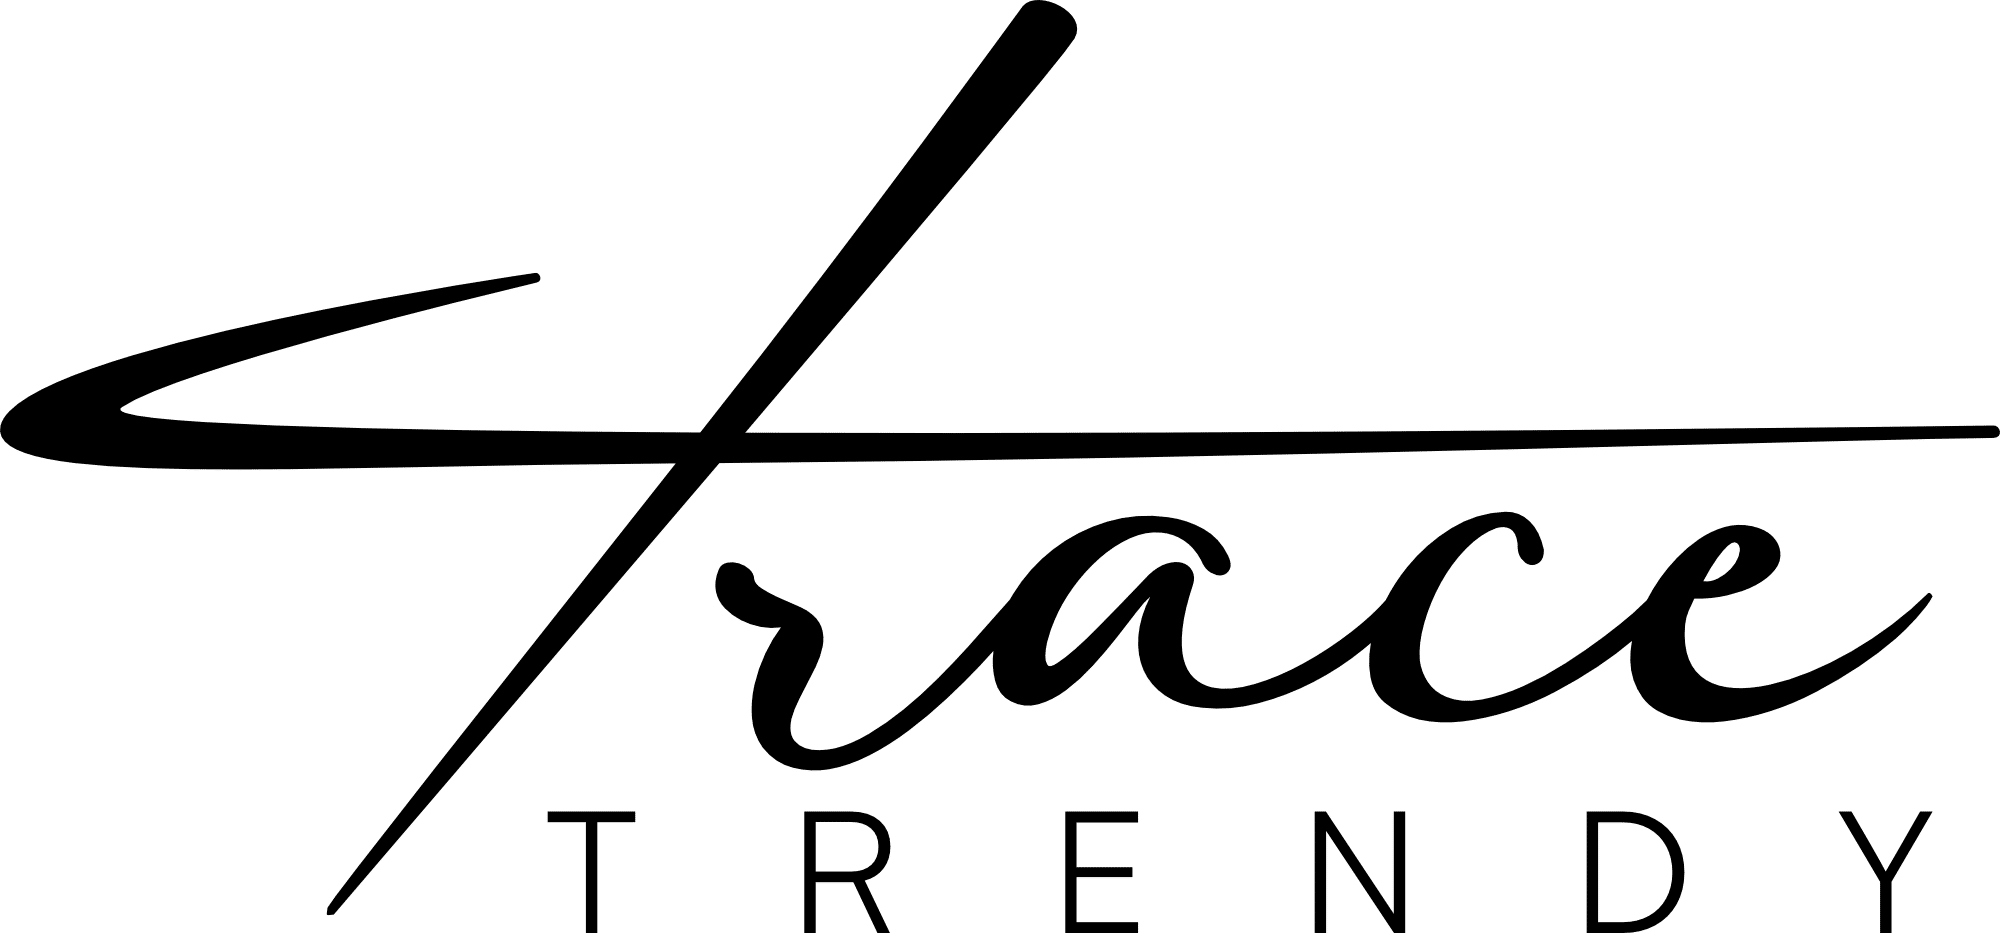 TraceTrendy: Timeless Bags & Accessories